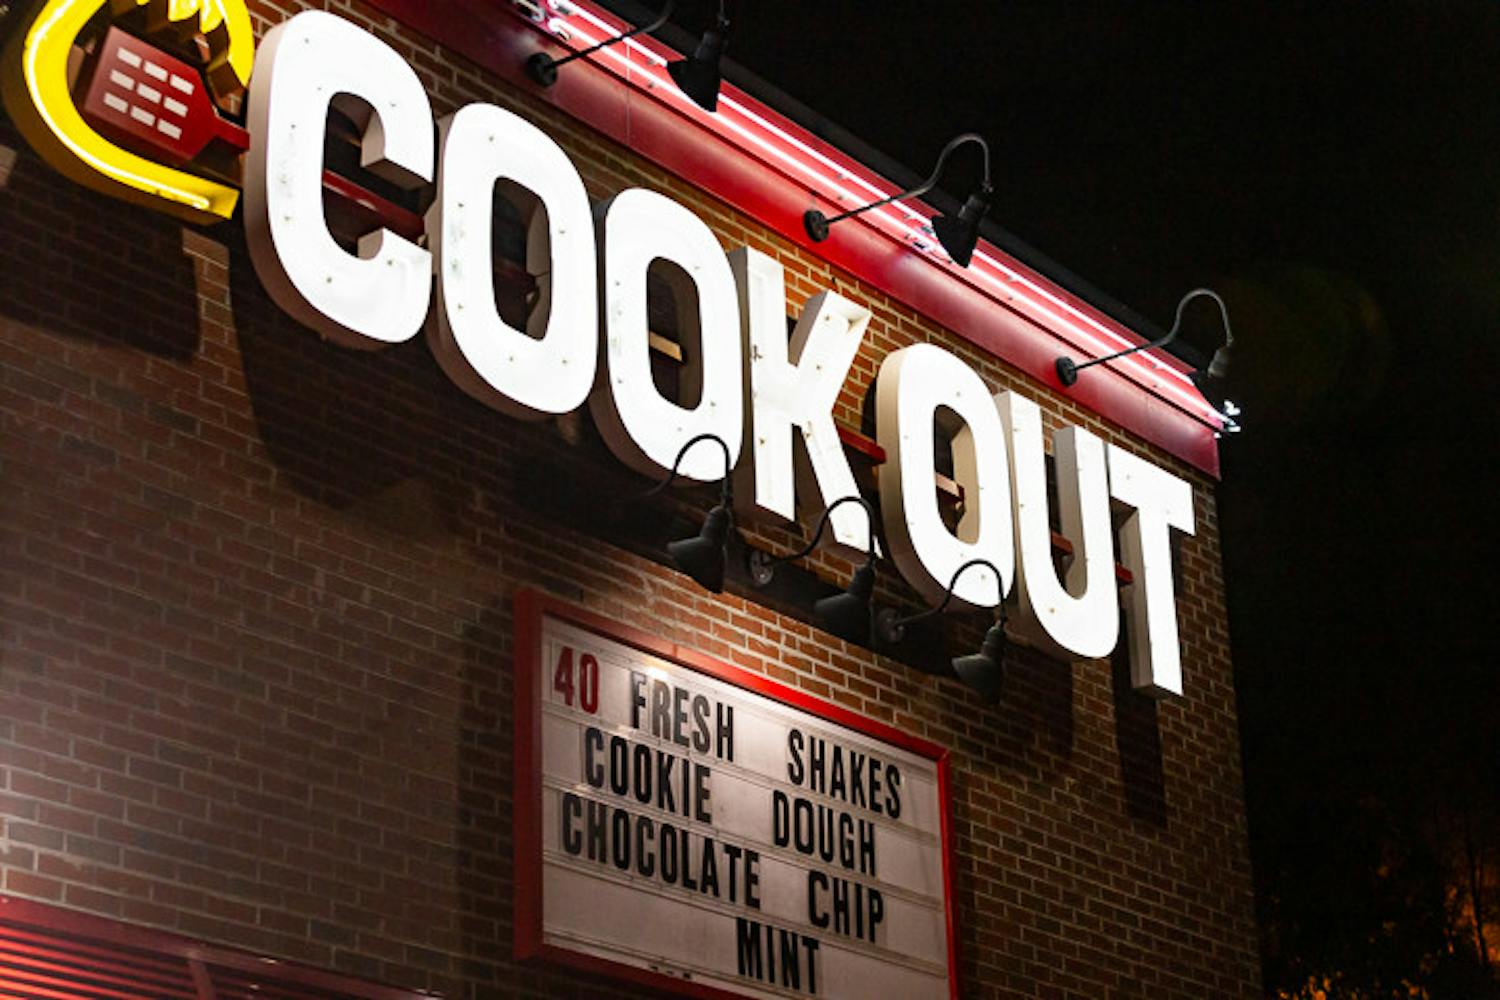 The iconic Cookout logo shines above the front entrance of the restaurant’s Five Points location. The fast-food restaurant originated in Greenville, S.C., and is exclusive to the Southeast region of the United States. The chain offers a wide assortment of burgers, entrees, sides and 40 different flavors of milkshakes.